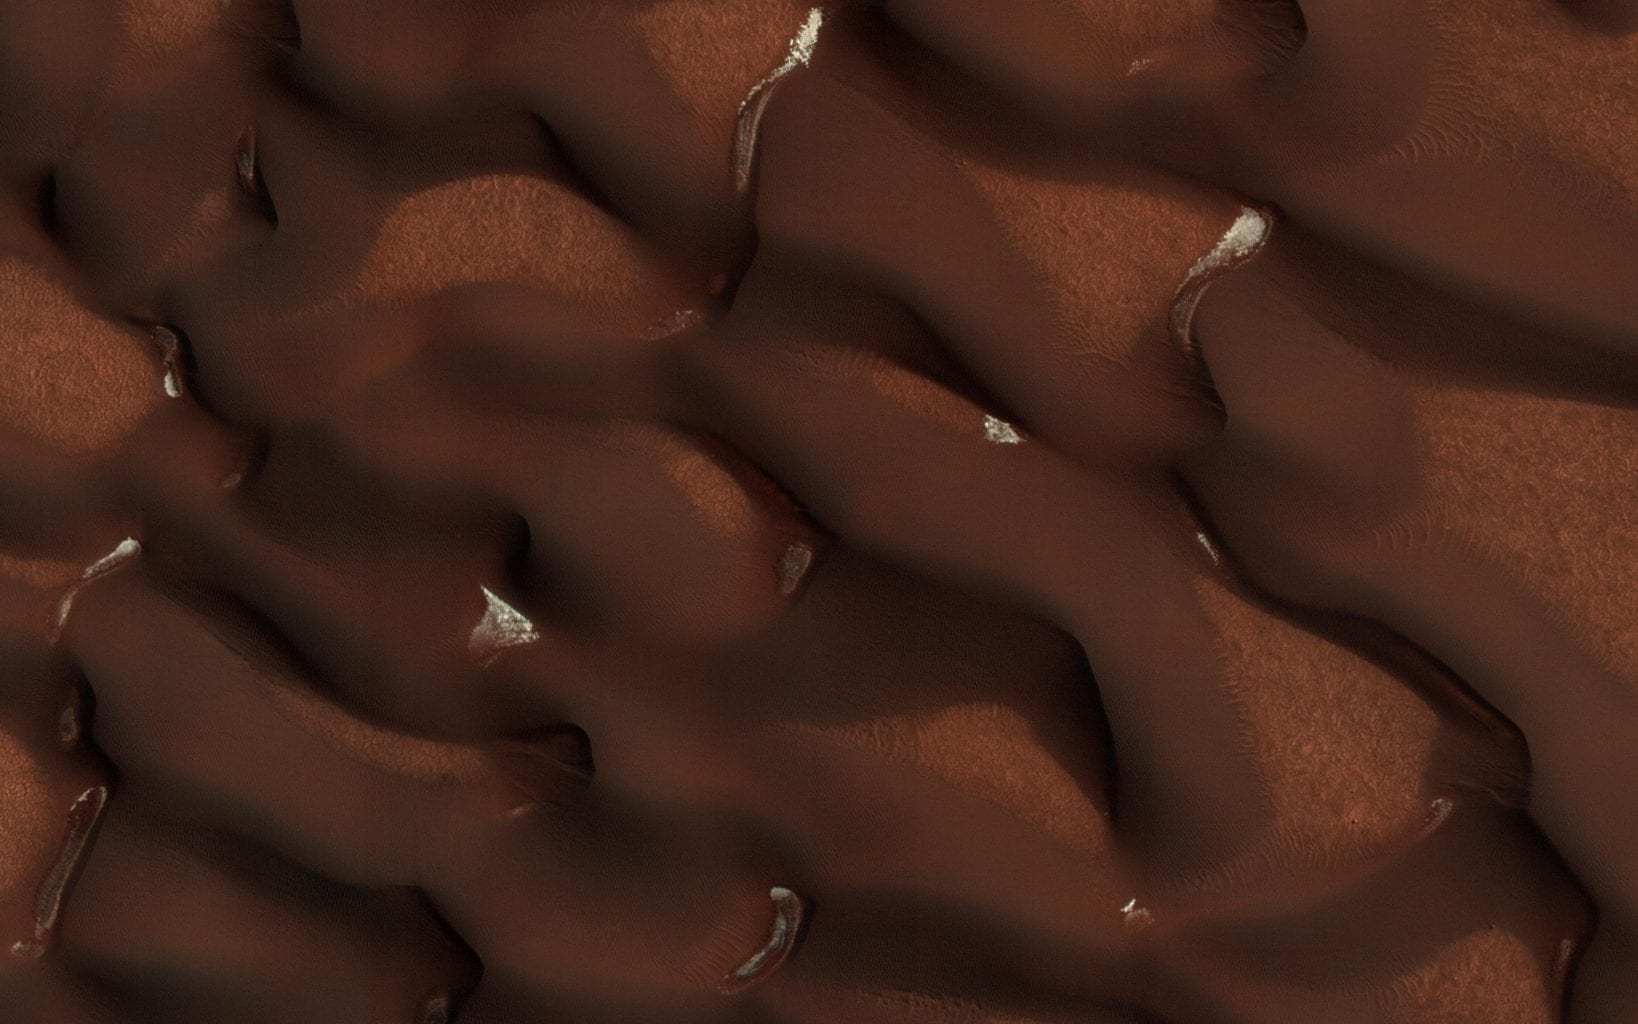 An image from the Martian summer of 2018 when the sand dunes were almost entirely free of the seasonal ice. Credit: NASA/JPL-Caltech/Univ. of Arizona